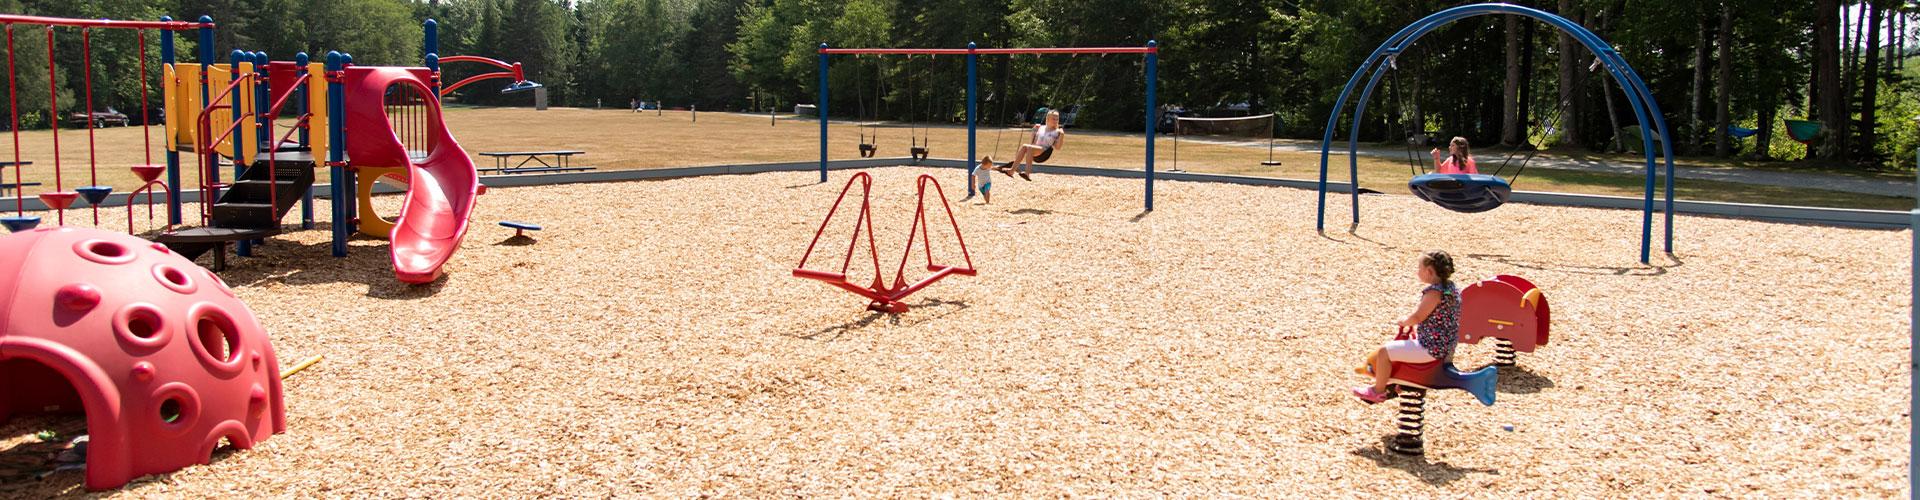 playground at smugglers den campground